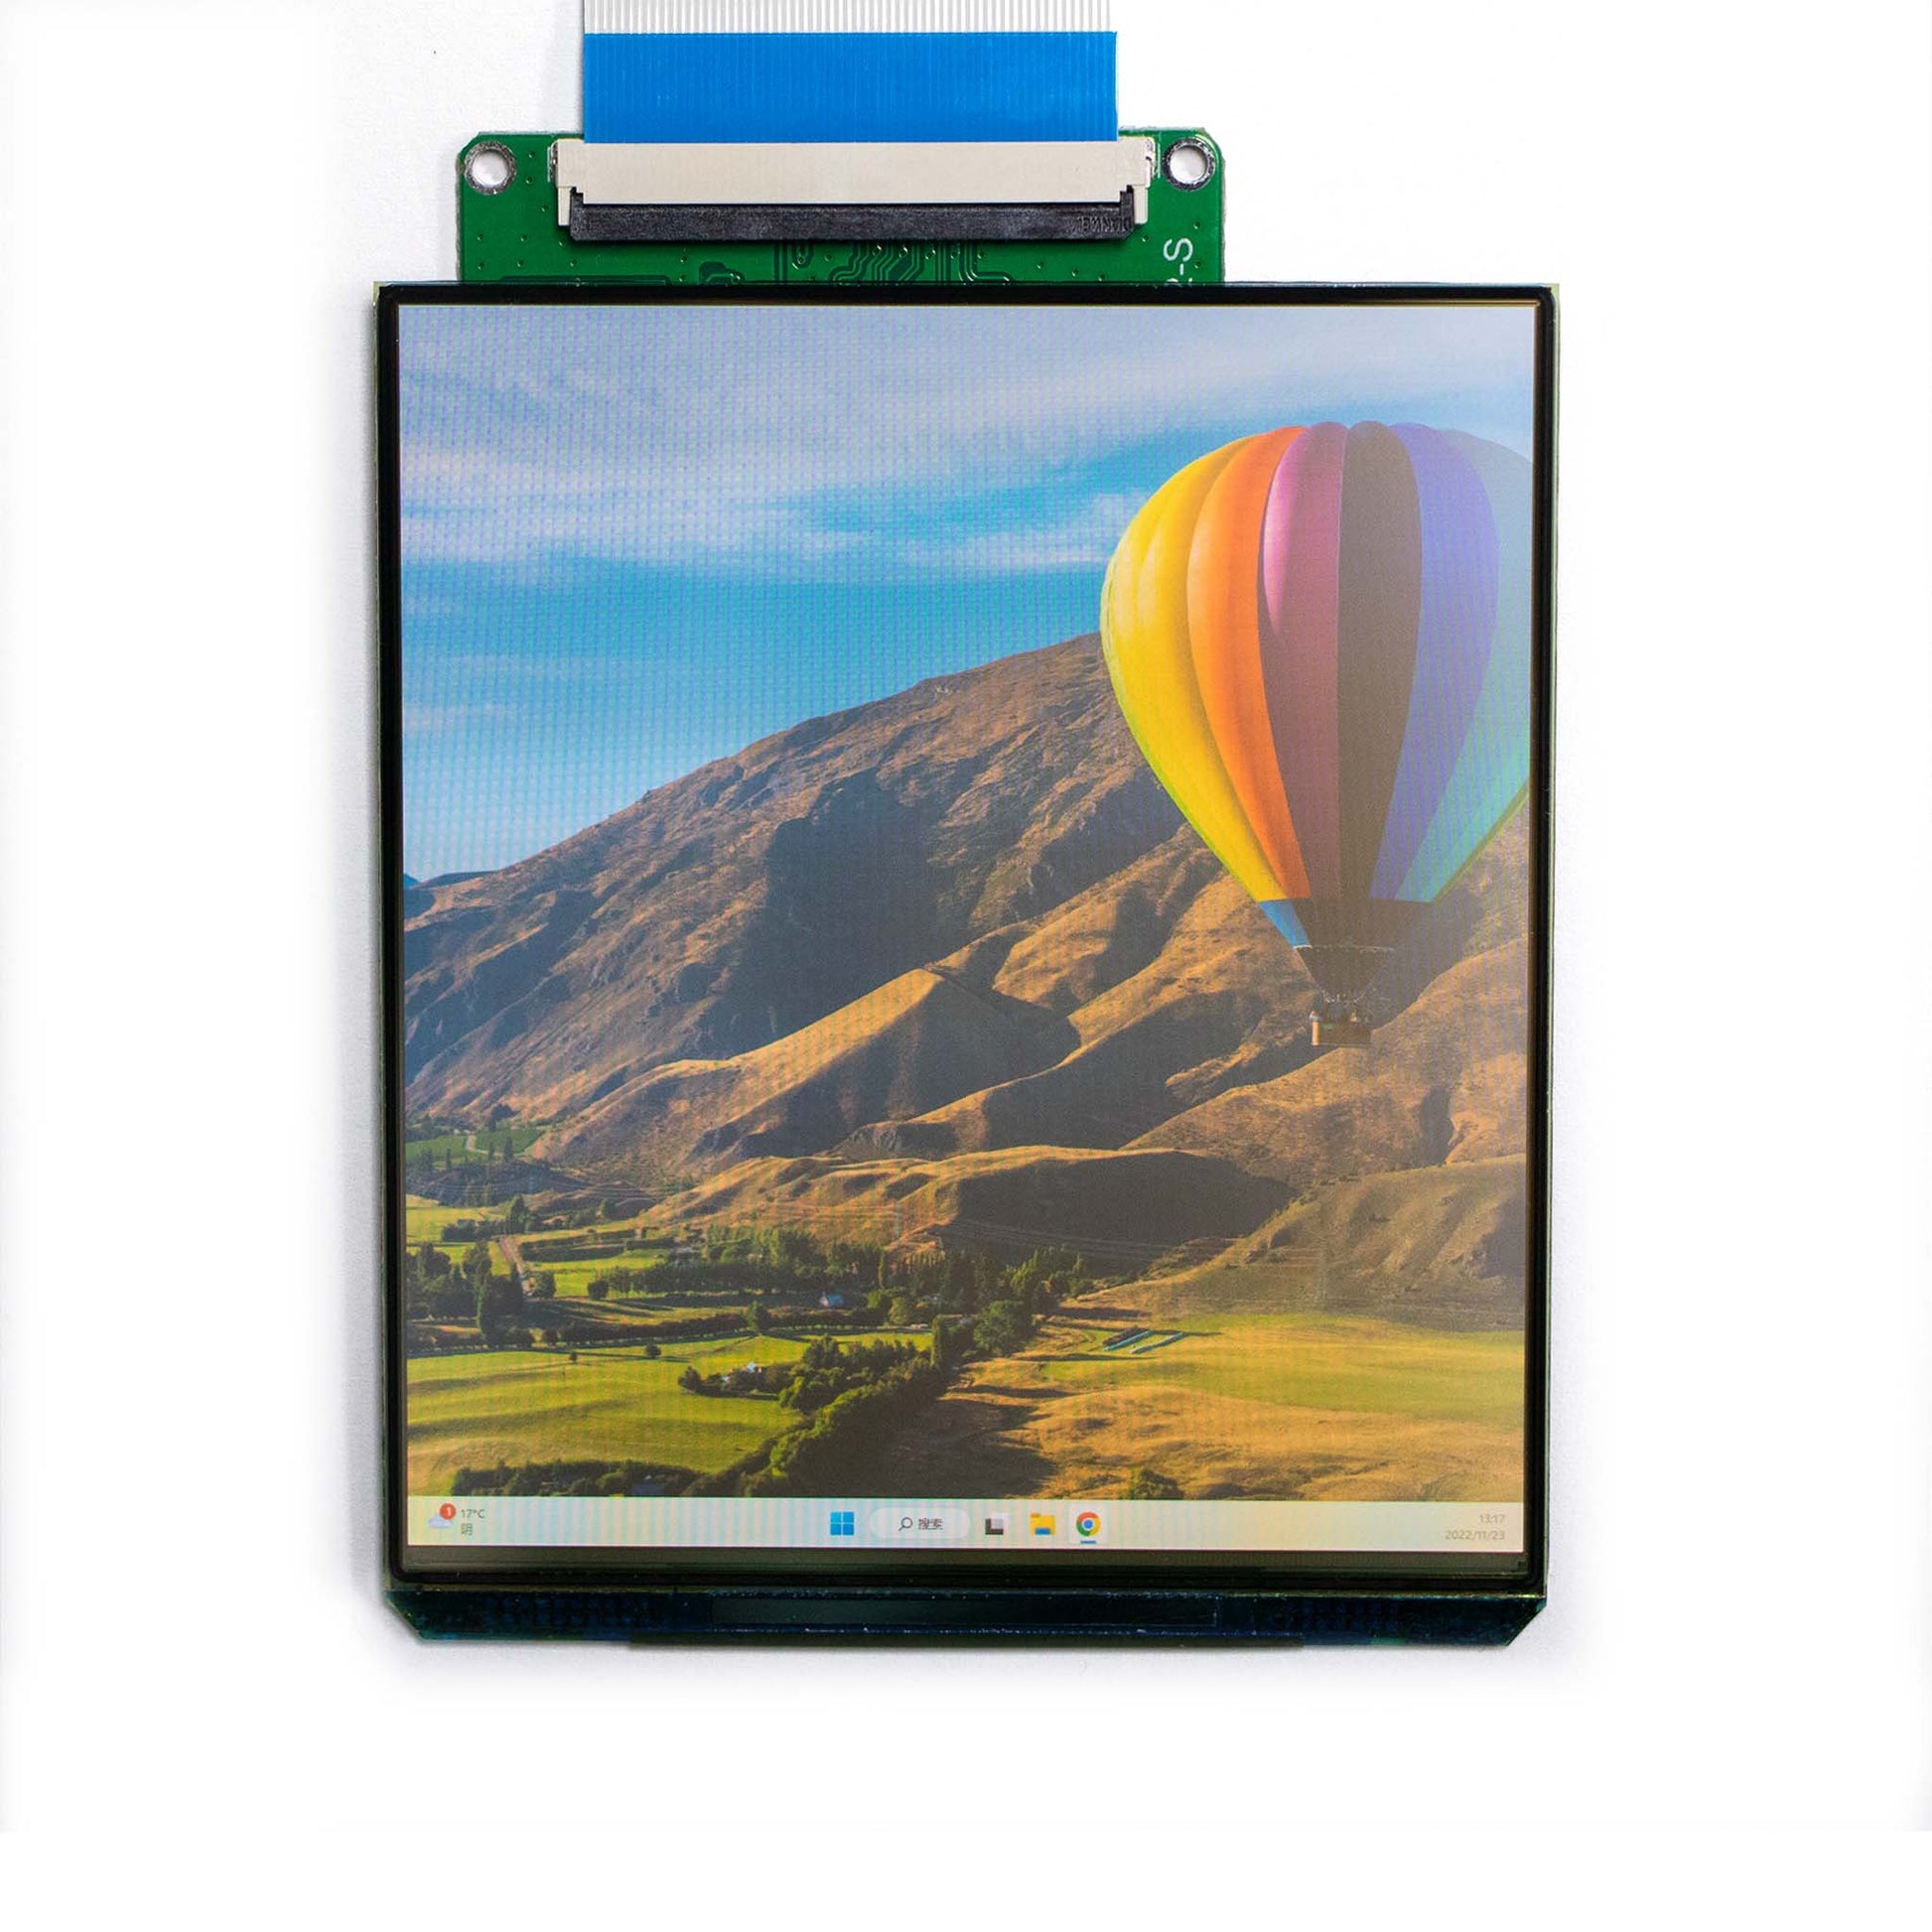 A 3.8-inch amoled screen showing a hot air balloon in a valley